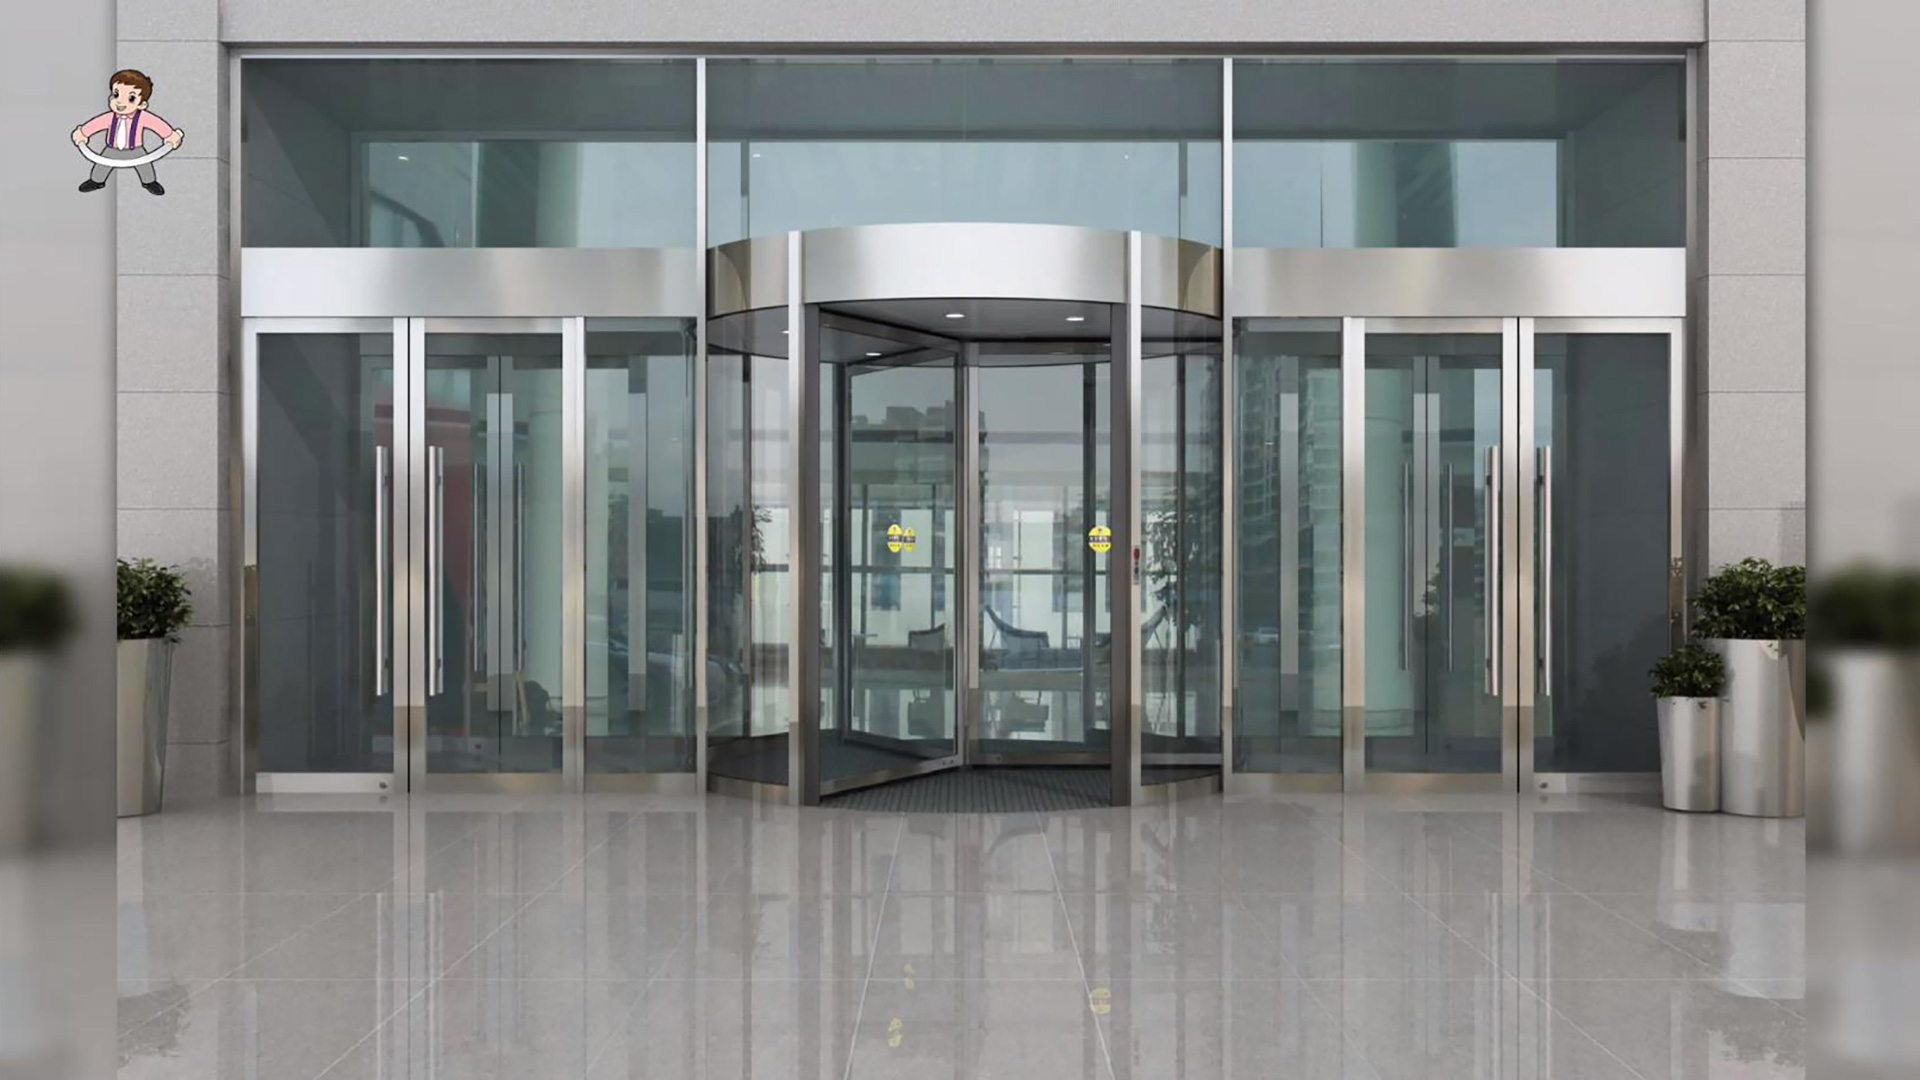 The revolving door gathers various advantages in one